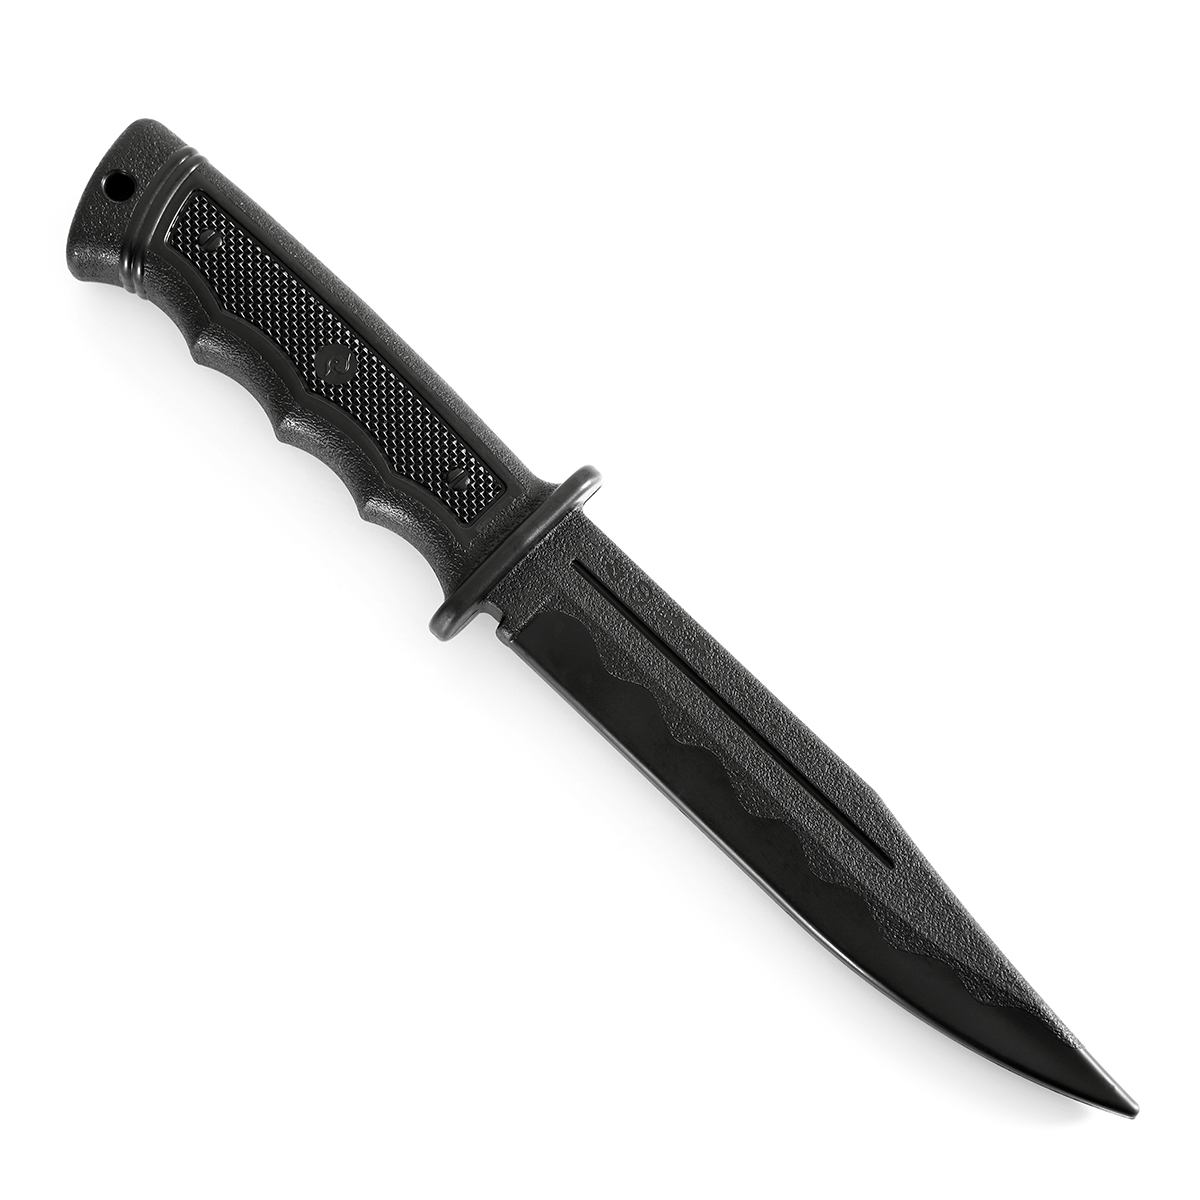 TPR Rubber "Military Classic" Training Knife - Click Image to Close